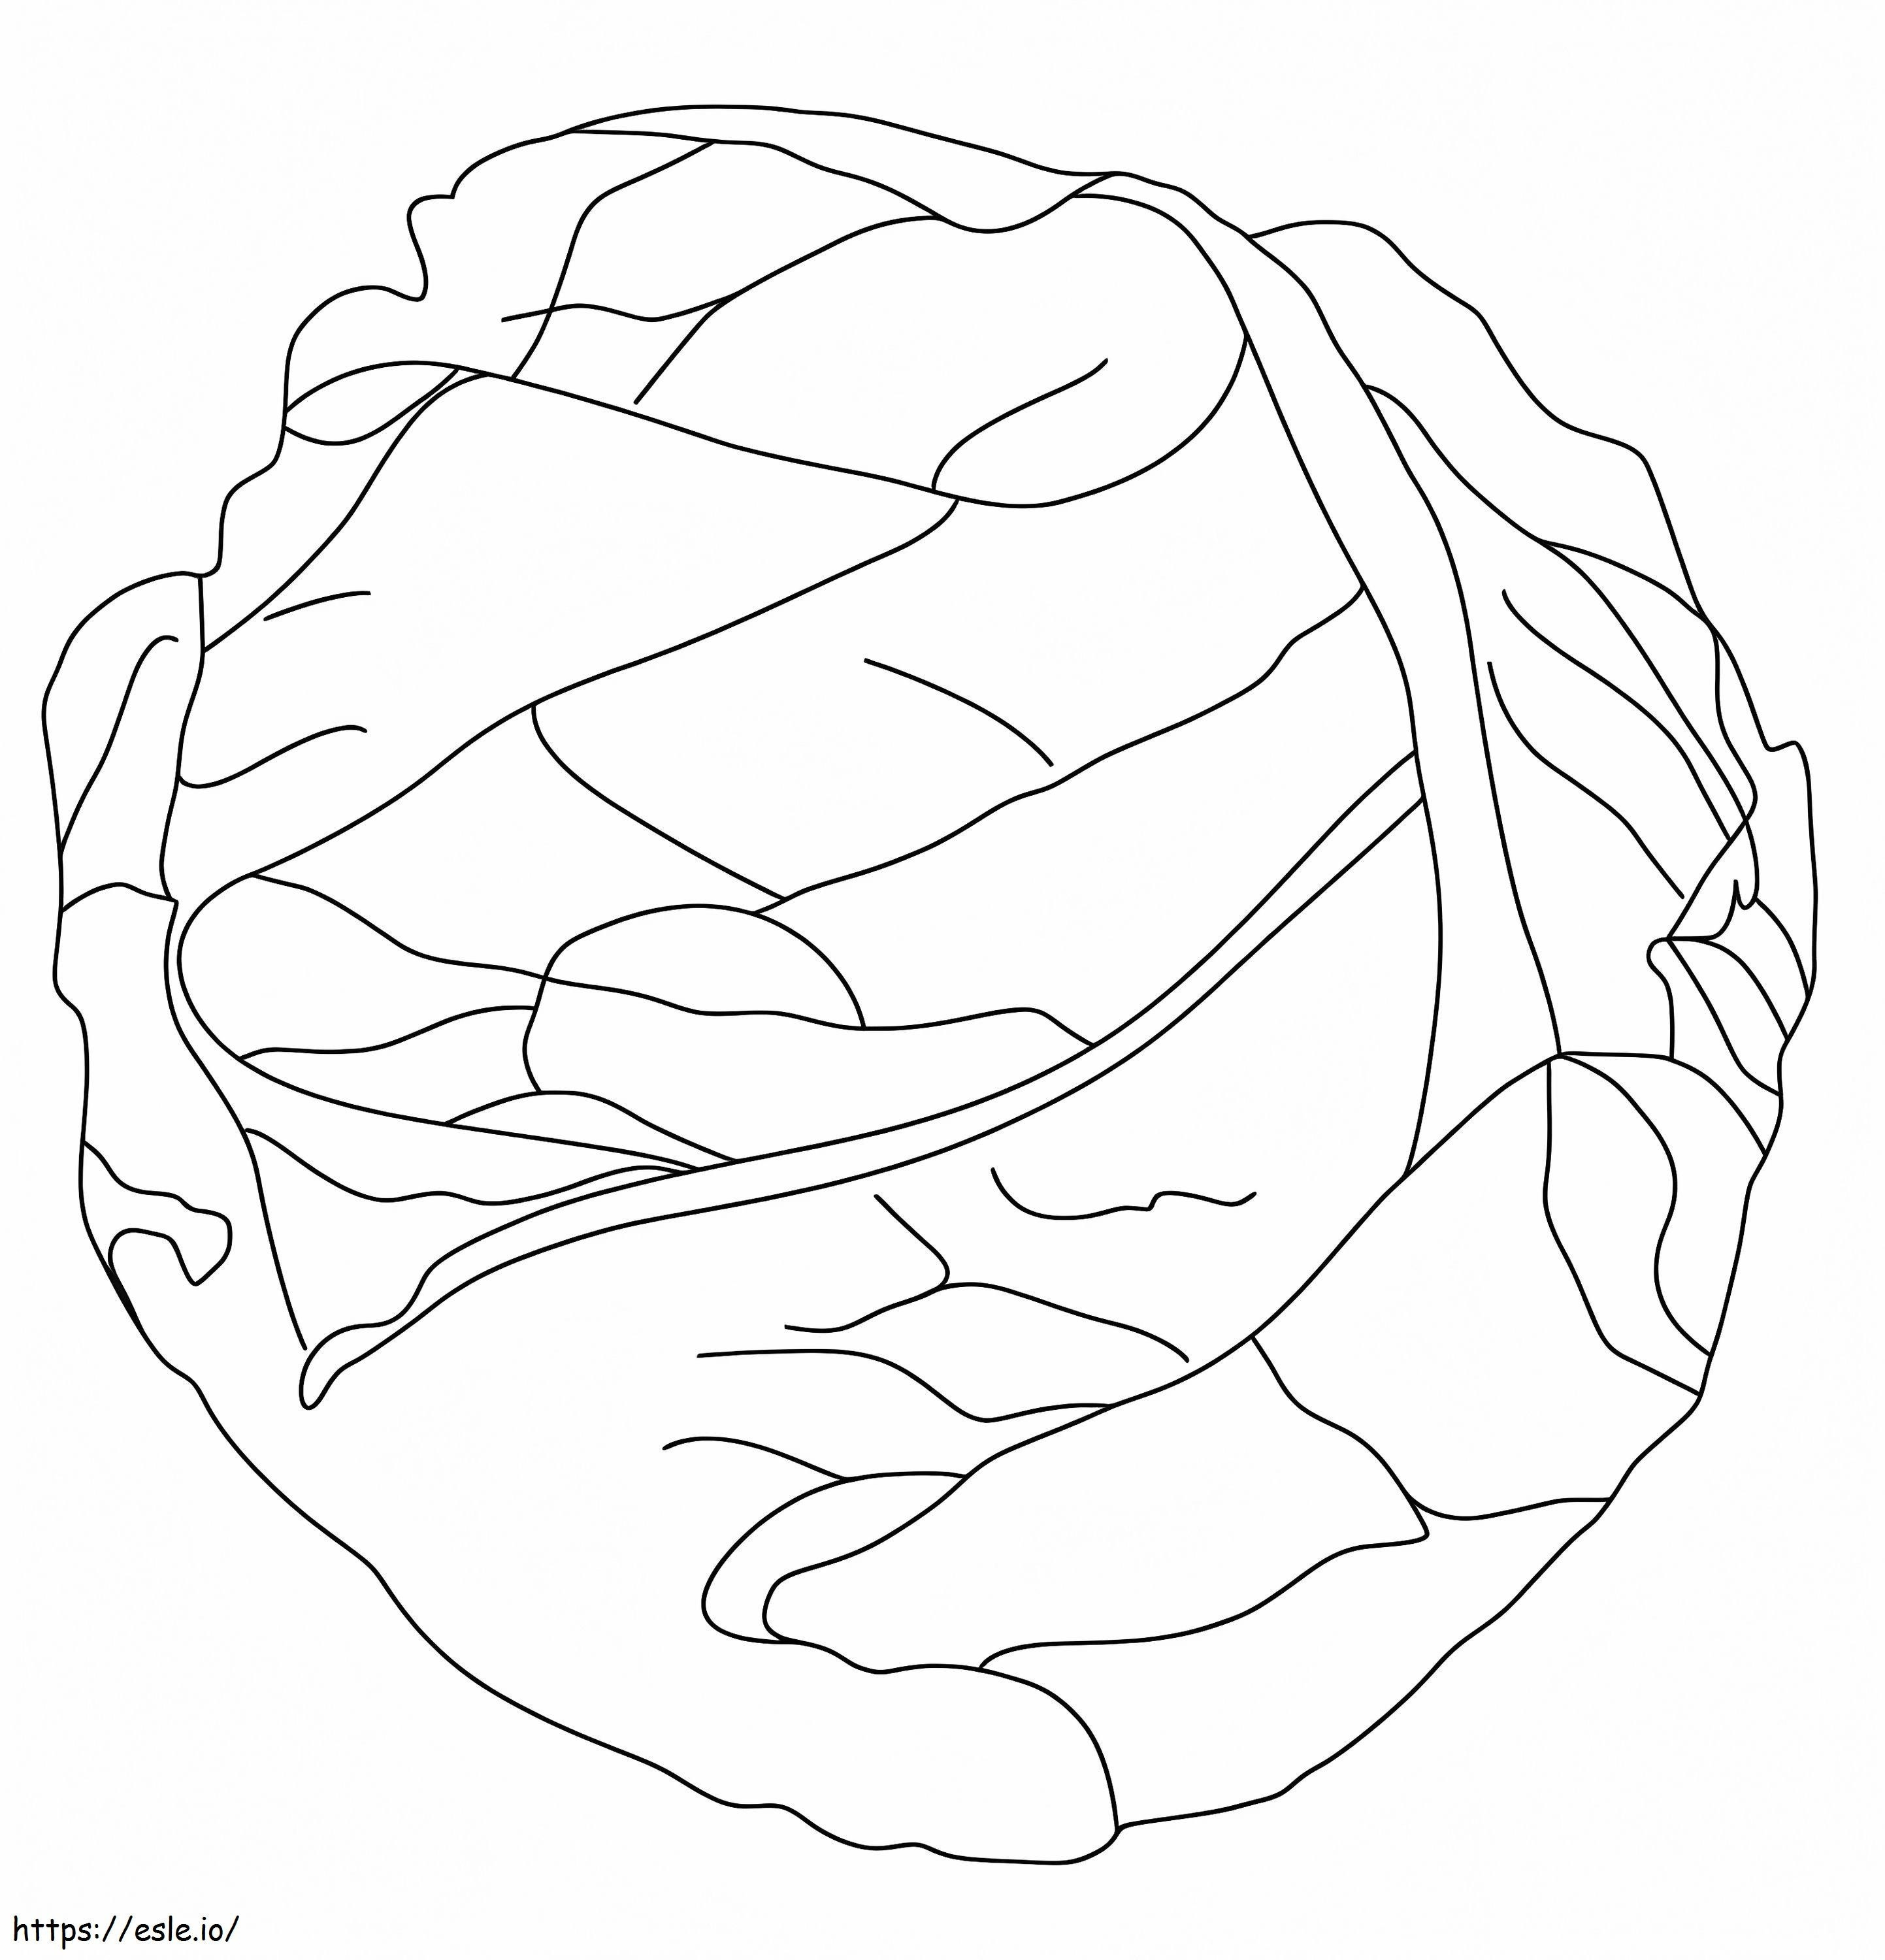 Normal Cabbage coloring page